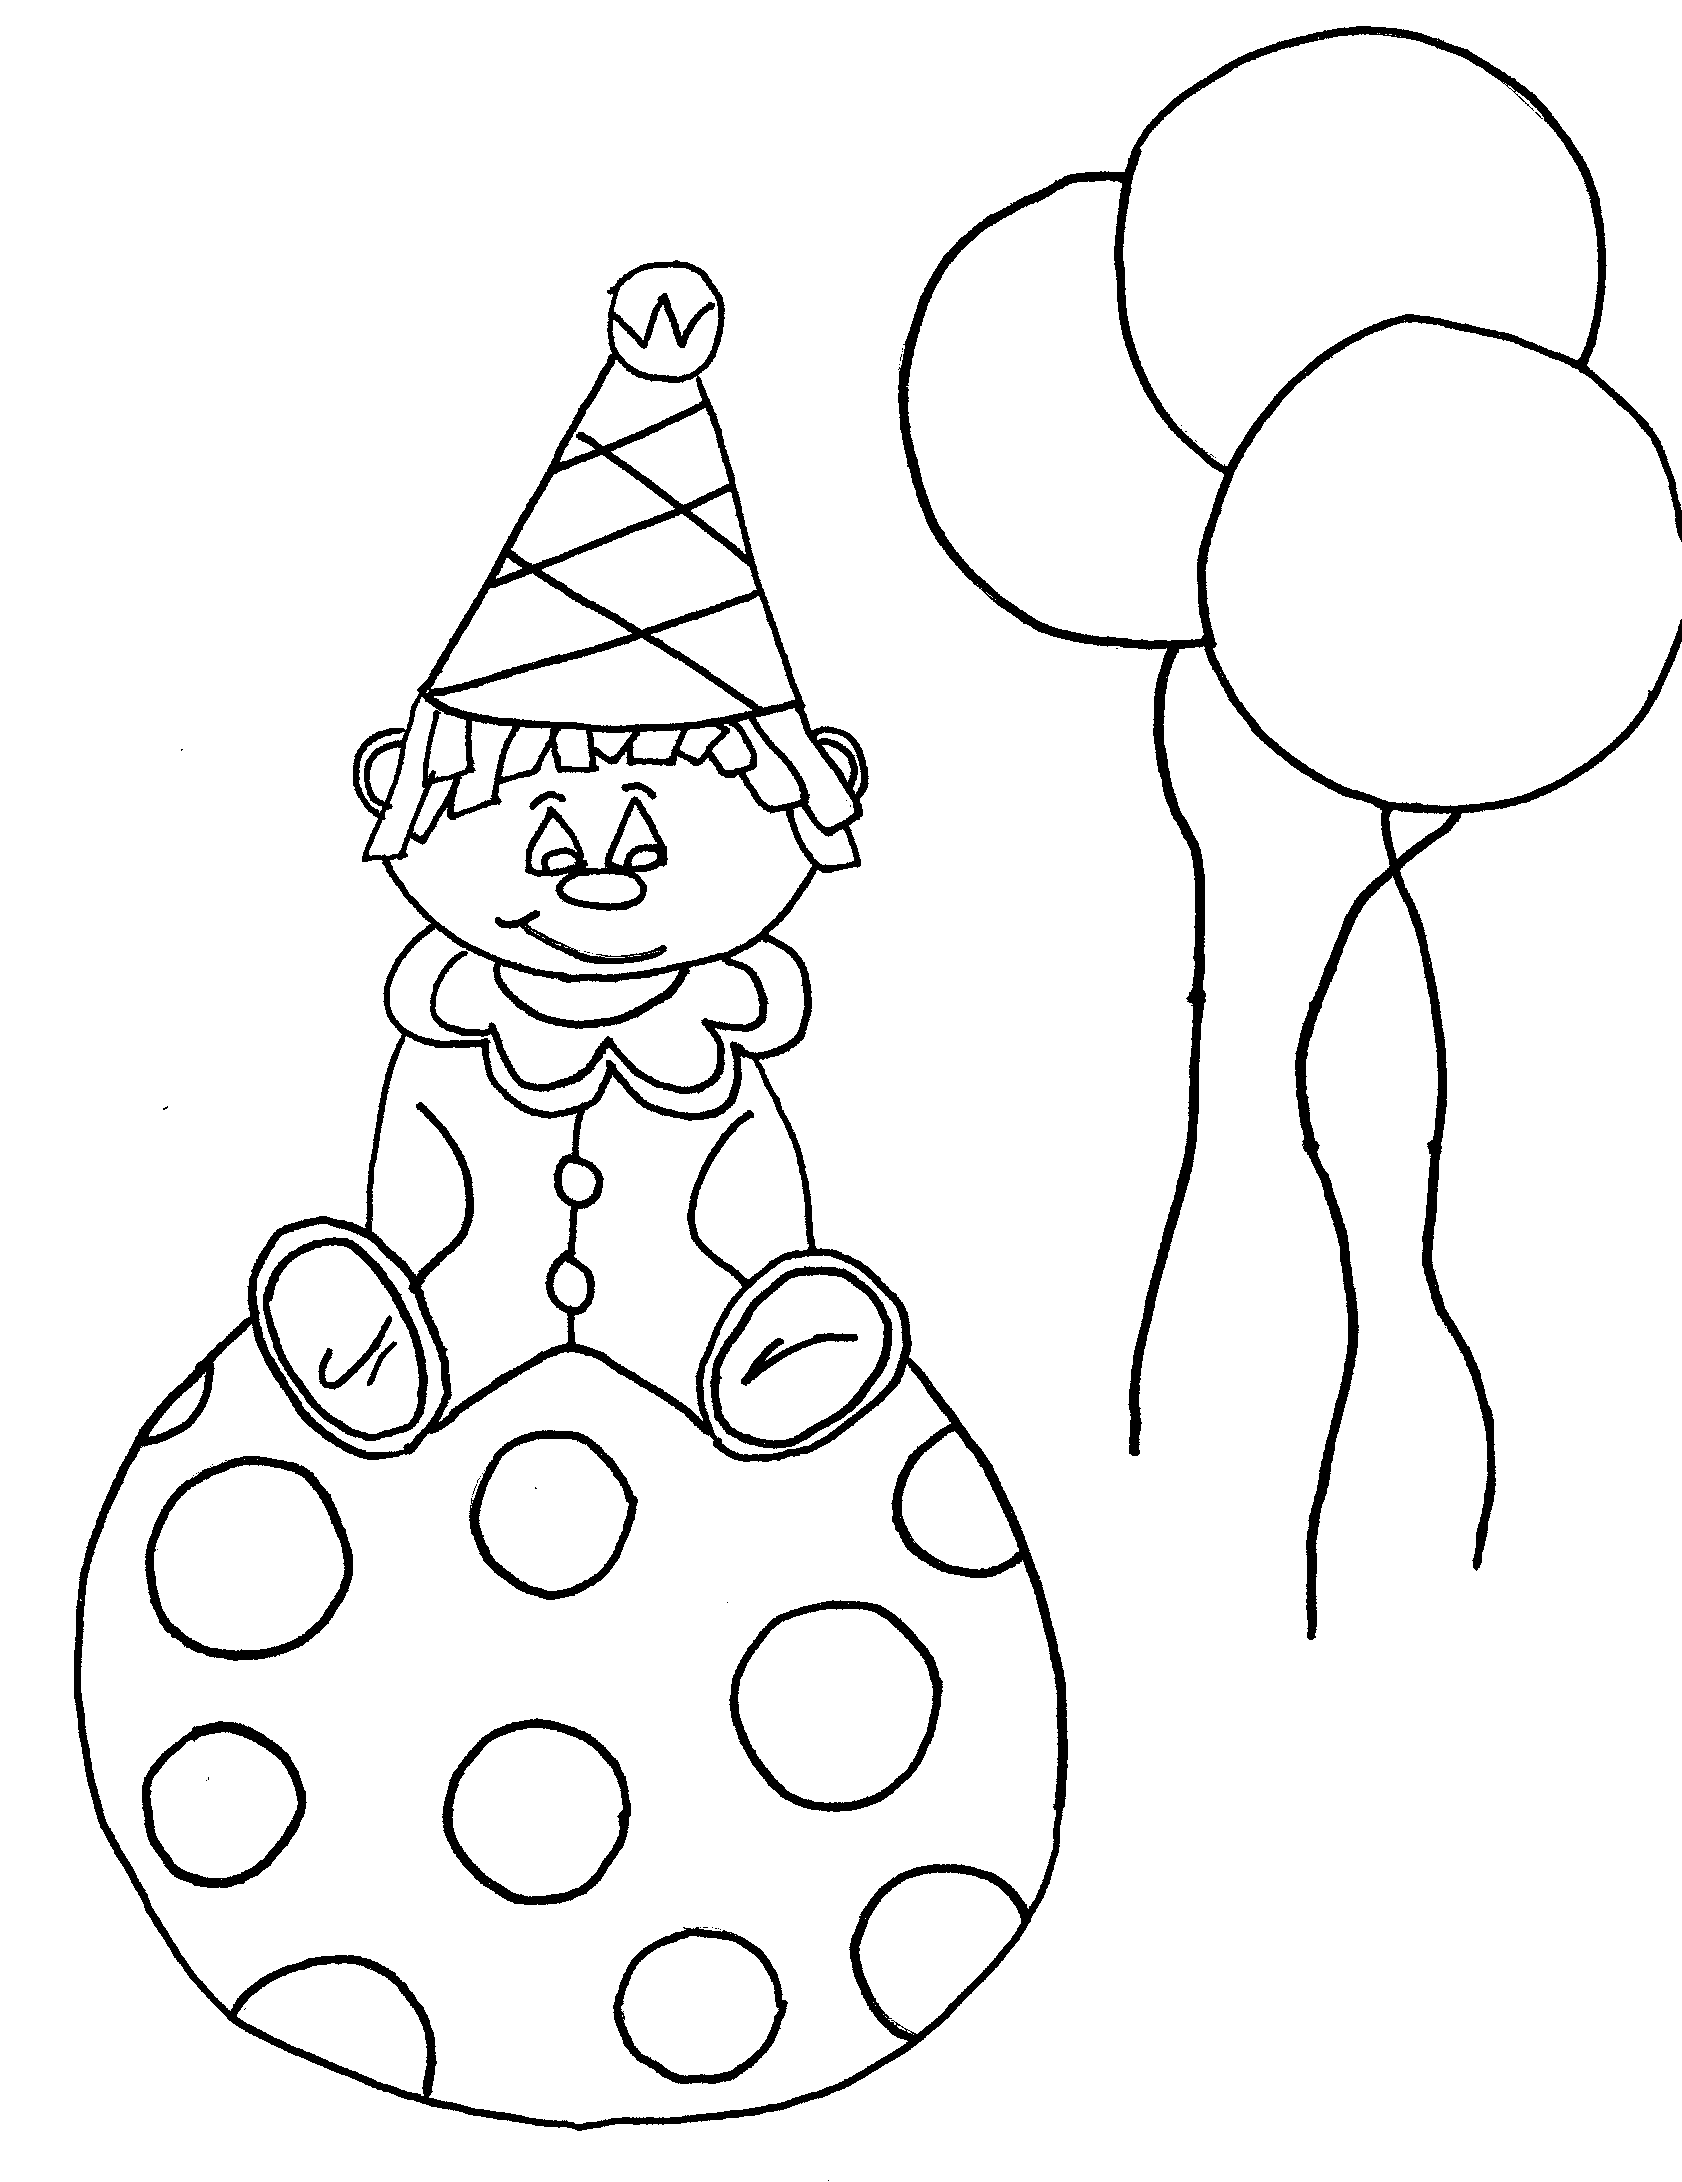 Clown Coloring Pages Clown Images Printable 2021 1780 Coloring4free